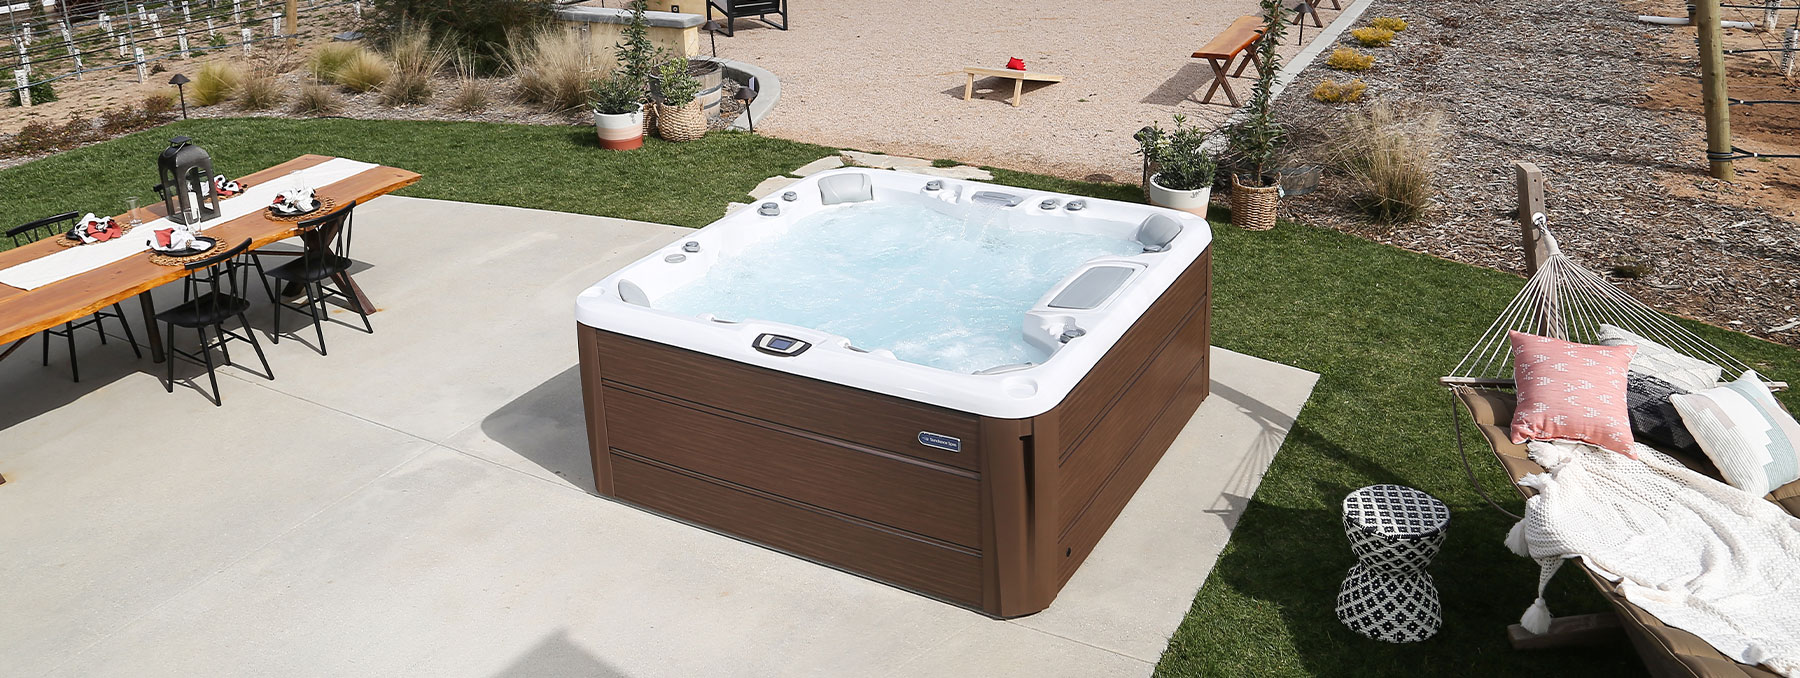 Health Benefits of Hot Tubs